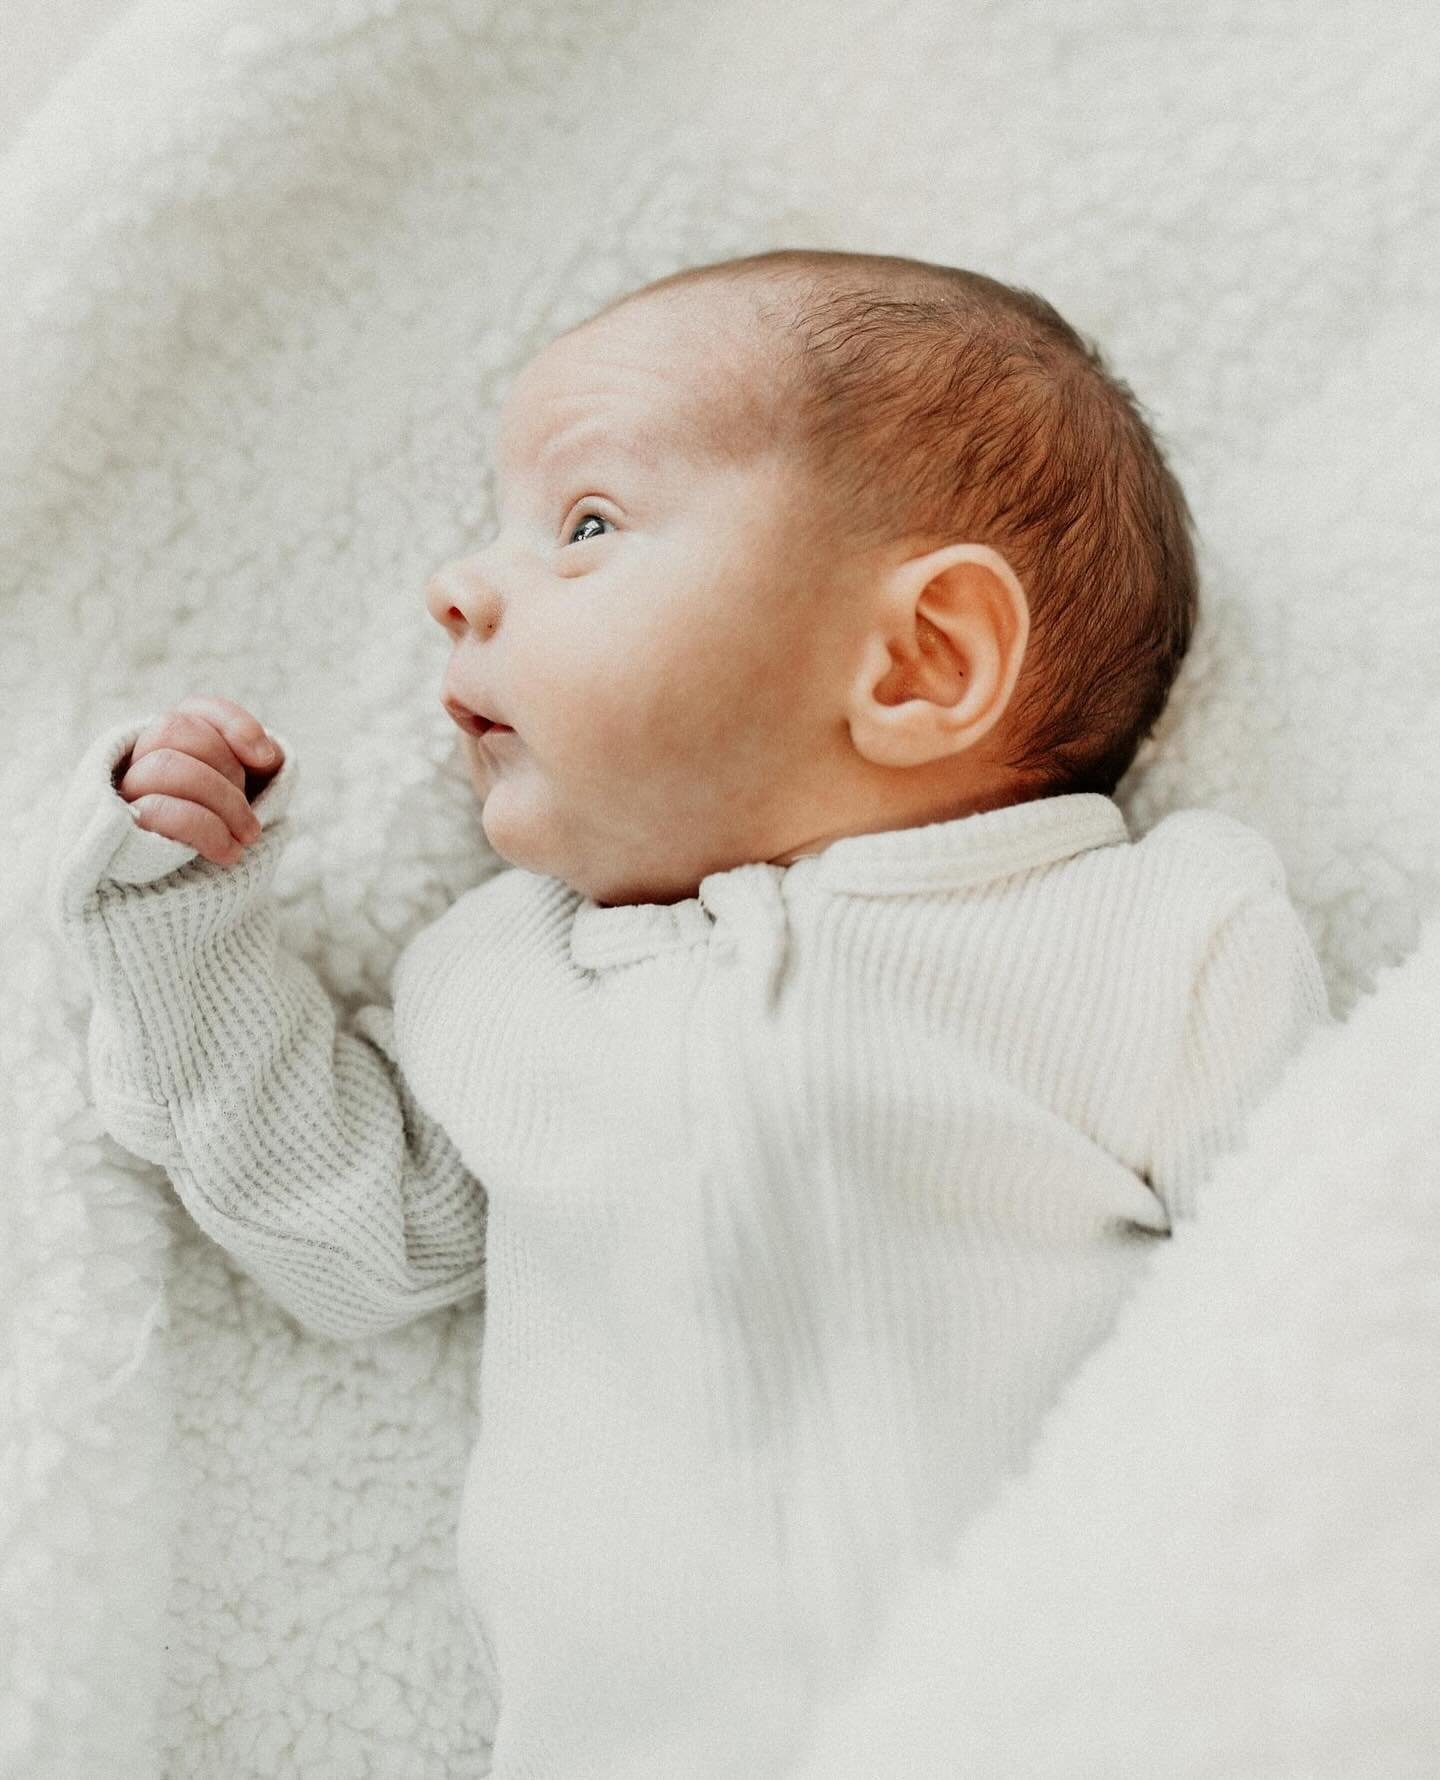 // welcome, precious baby Paxton! 🤎

Born a few weeks early, he&rsquo;s settling right in at home! So grateful for the opportunity to capture another milestone for the sweet Stasik fam 🥰🥰